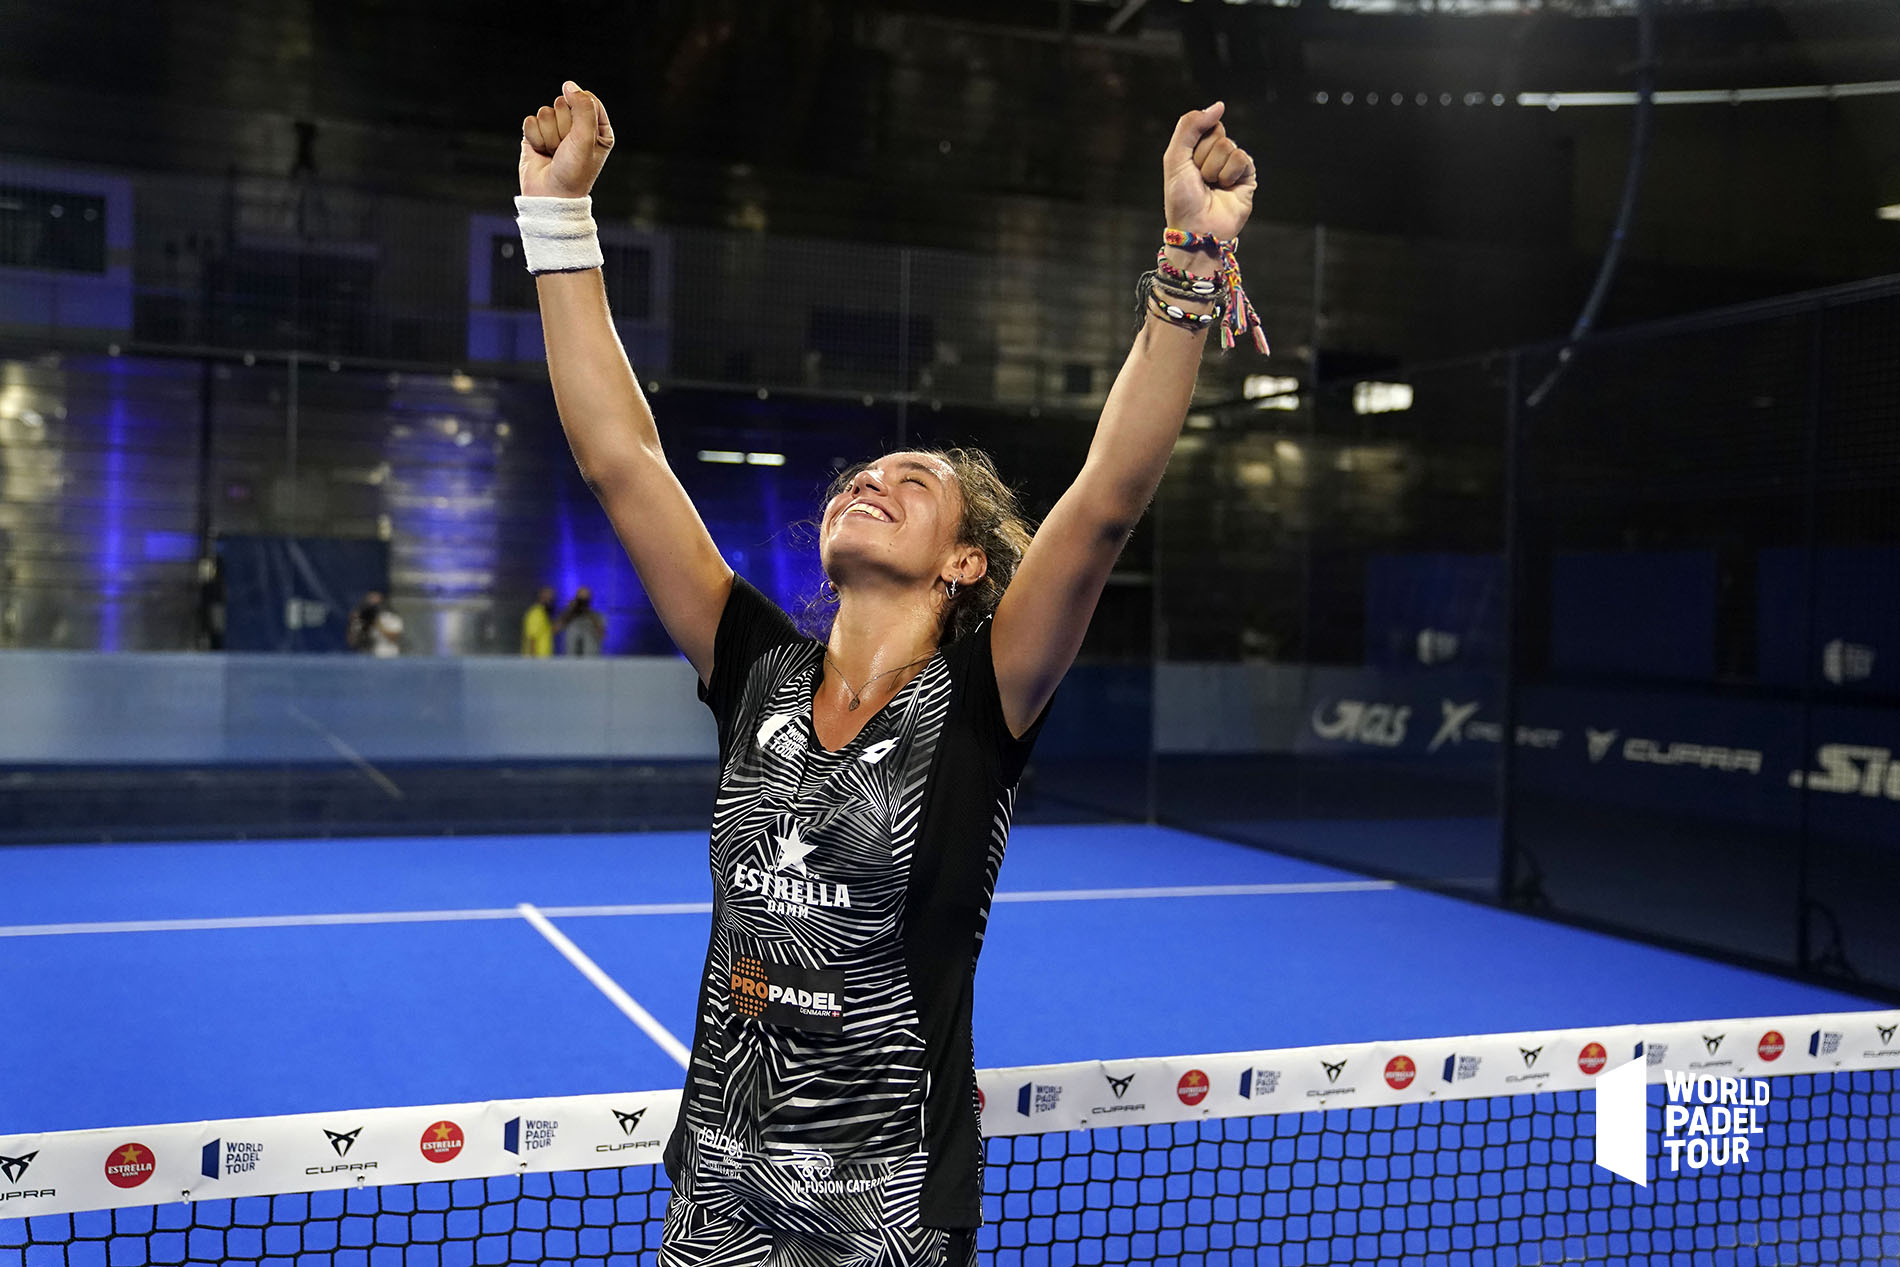 The five youngest winners in World Padel Tour history